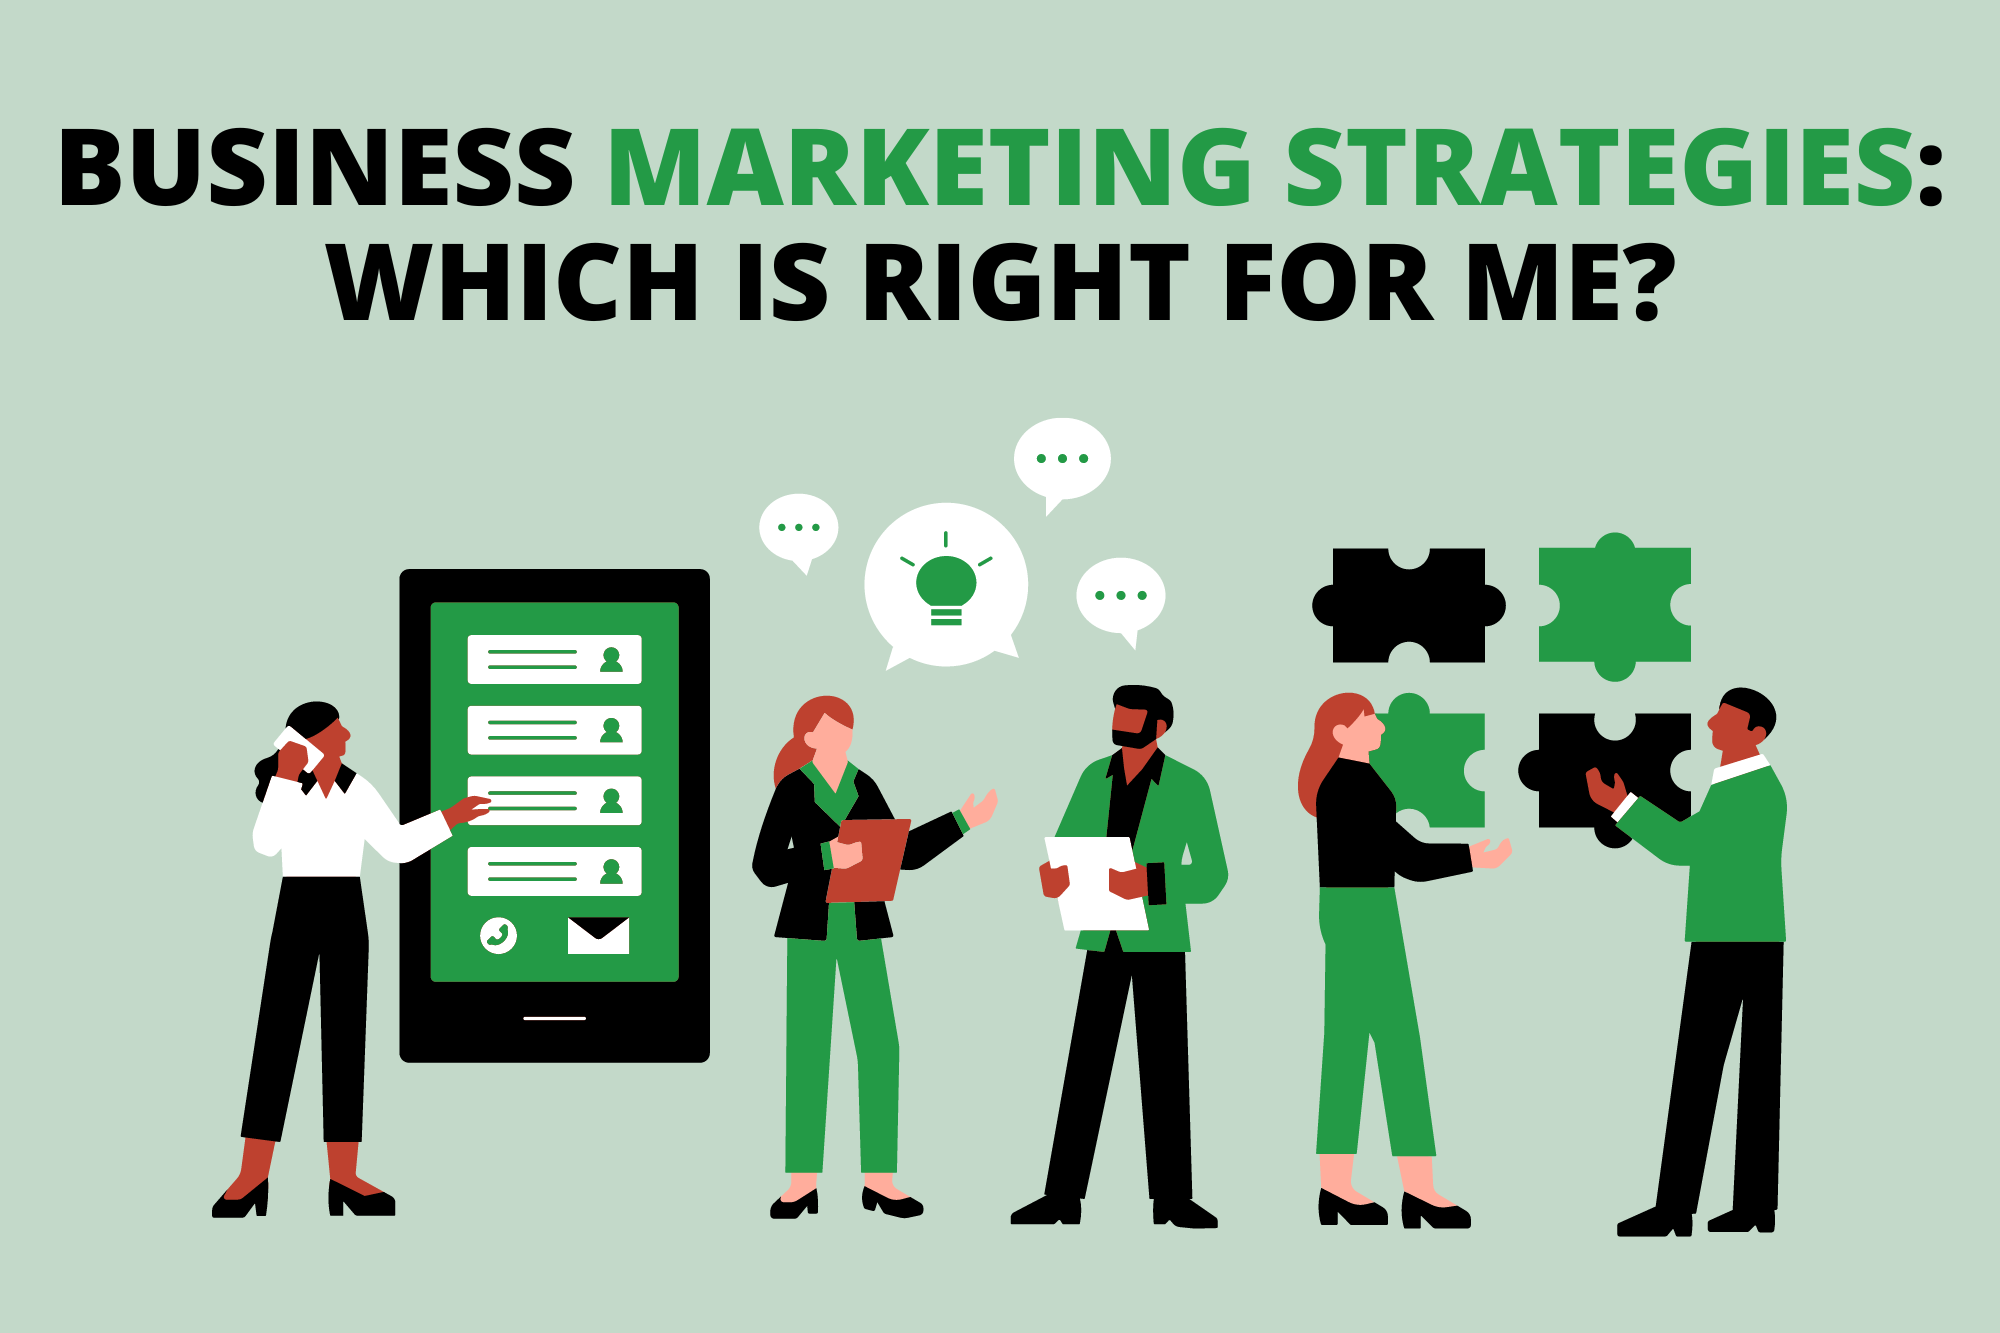 Business Marketing Strategies: Which Is Right for Me?